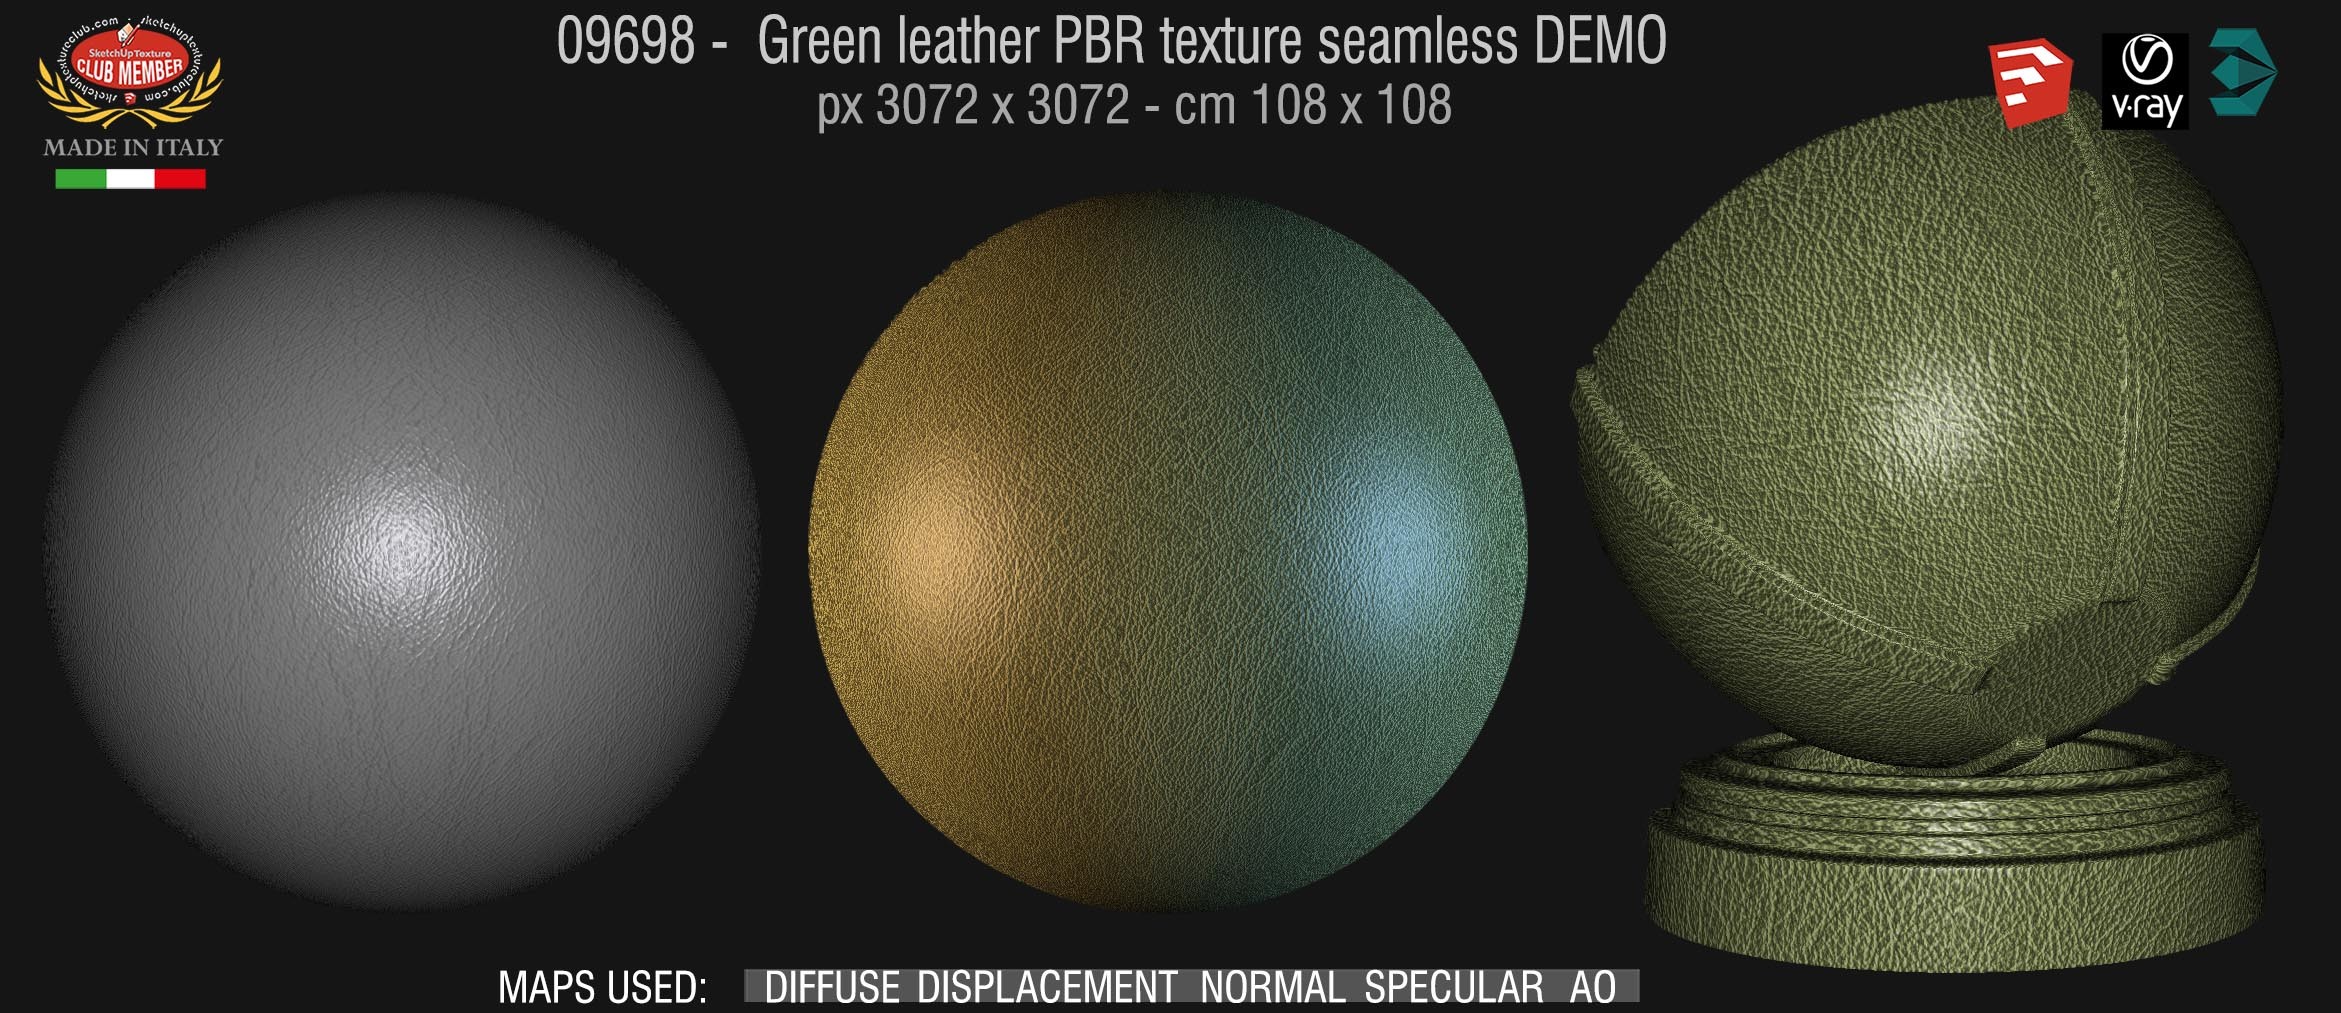 09698 Green leather PBR texture seamless DEMO